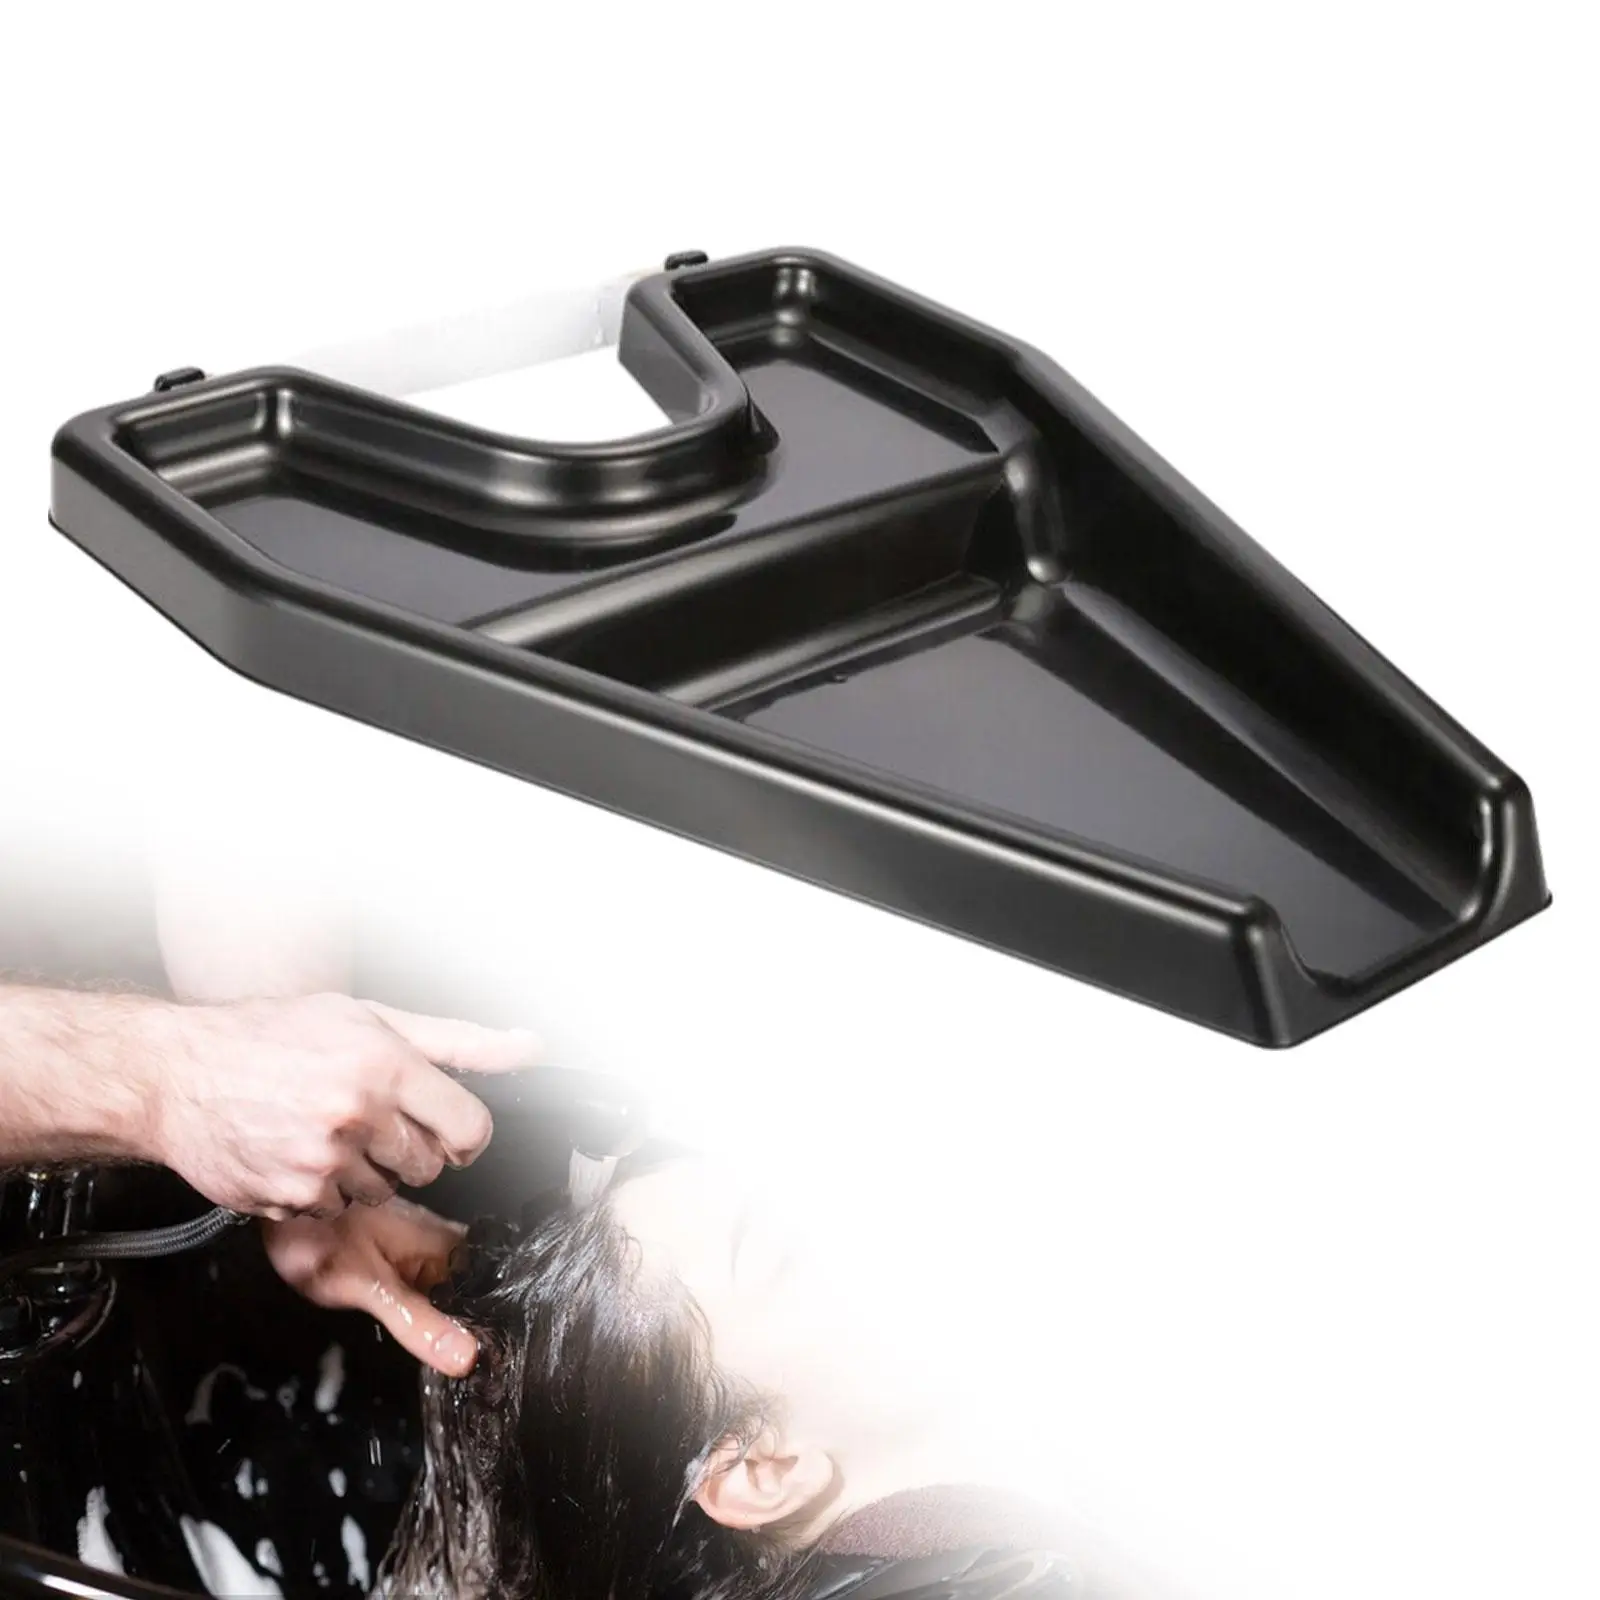 Shampoo Basin Wash Hair in Bed Rinse Basin Professional Hair Washing Tray Portable for Seniors Carers Children Bedside Disabled